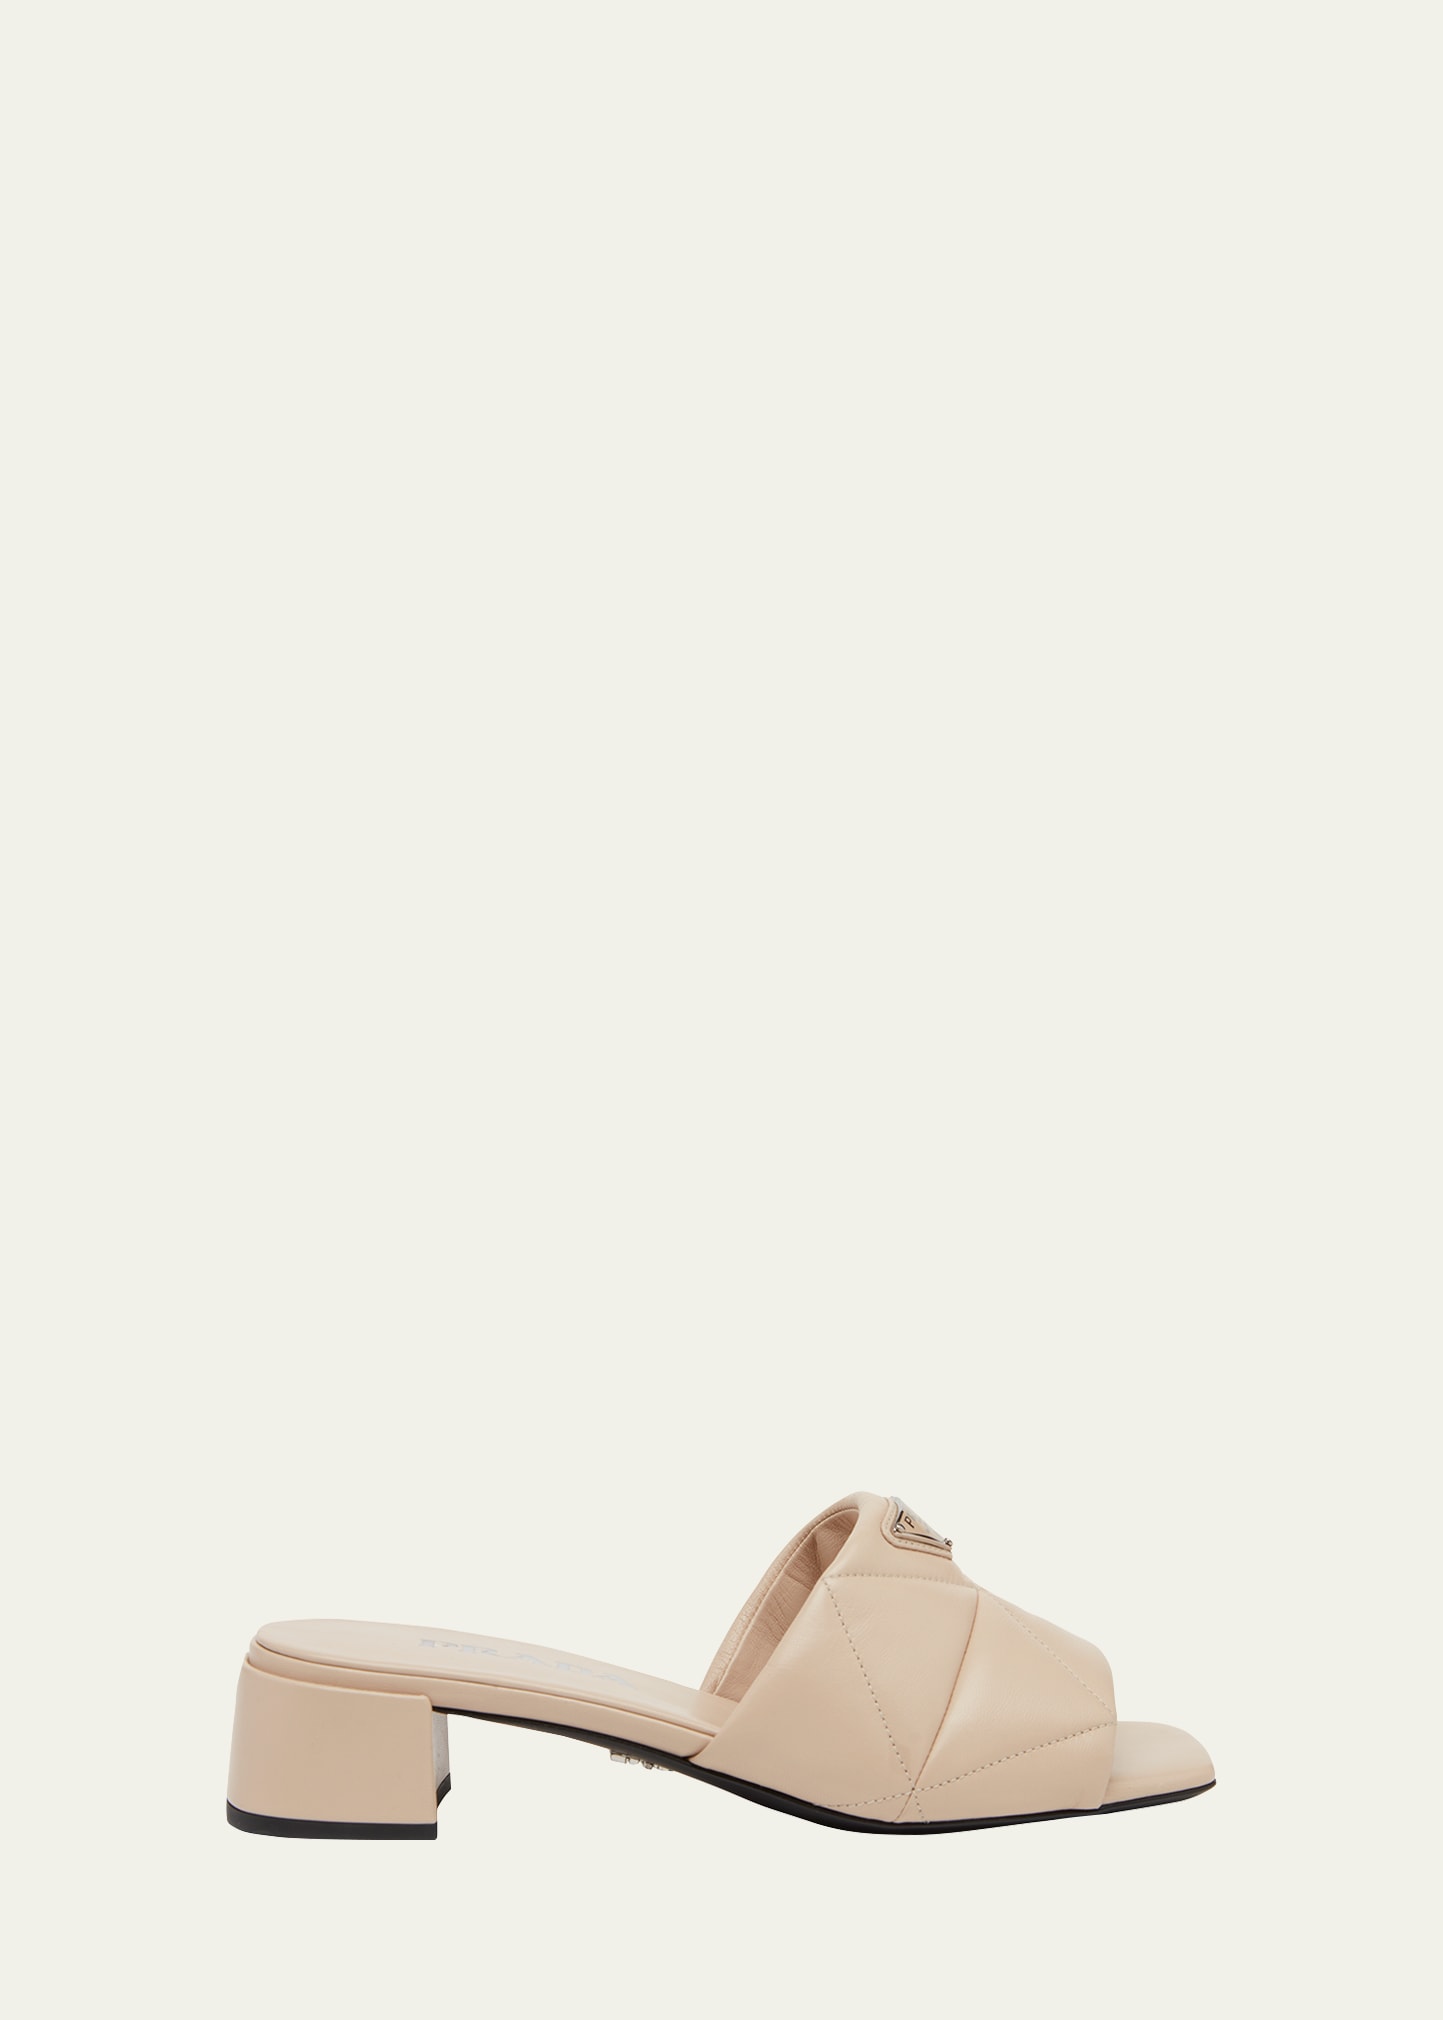 PRADA QUILTED LEATHER SLIDE SANDALS